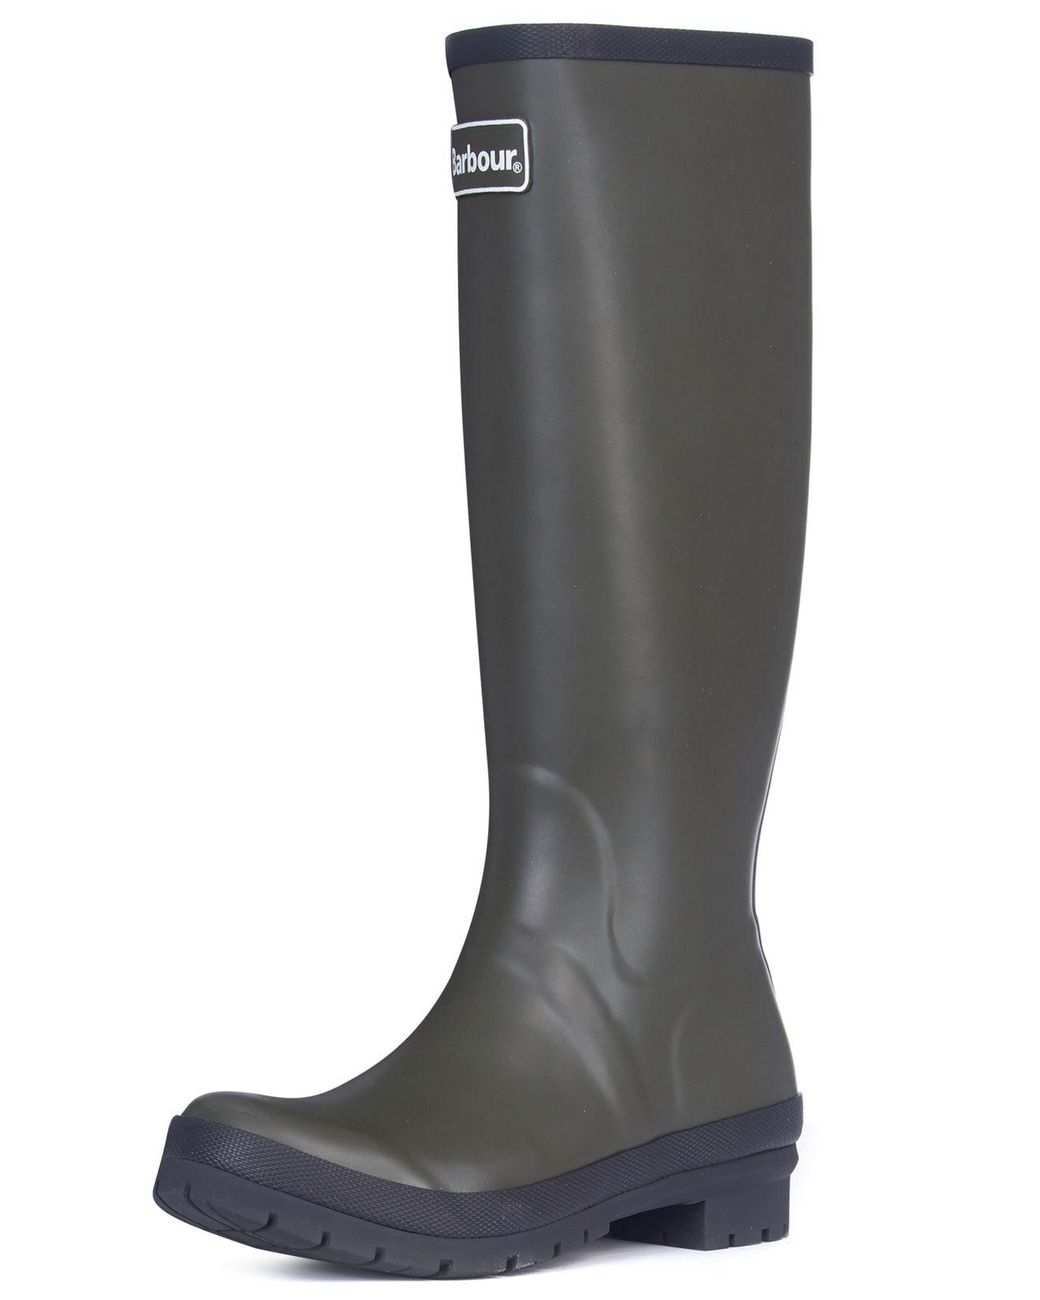 Barbour Rubber Abbey Tall Rain Boots in Olive (Green) - Lyst